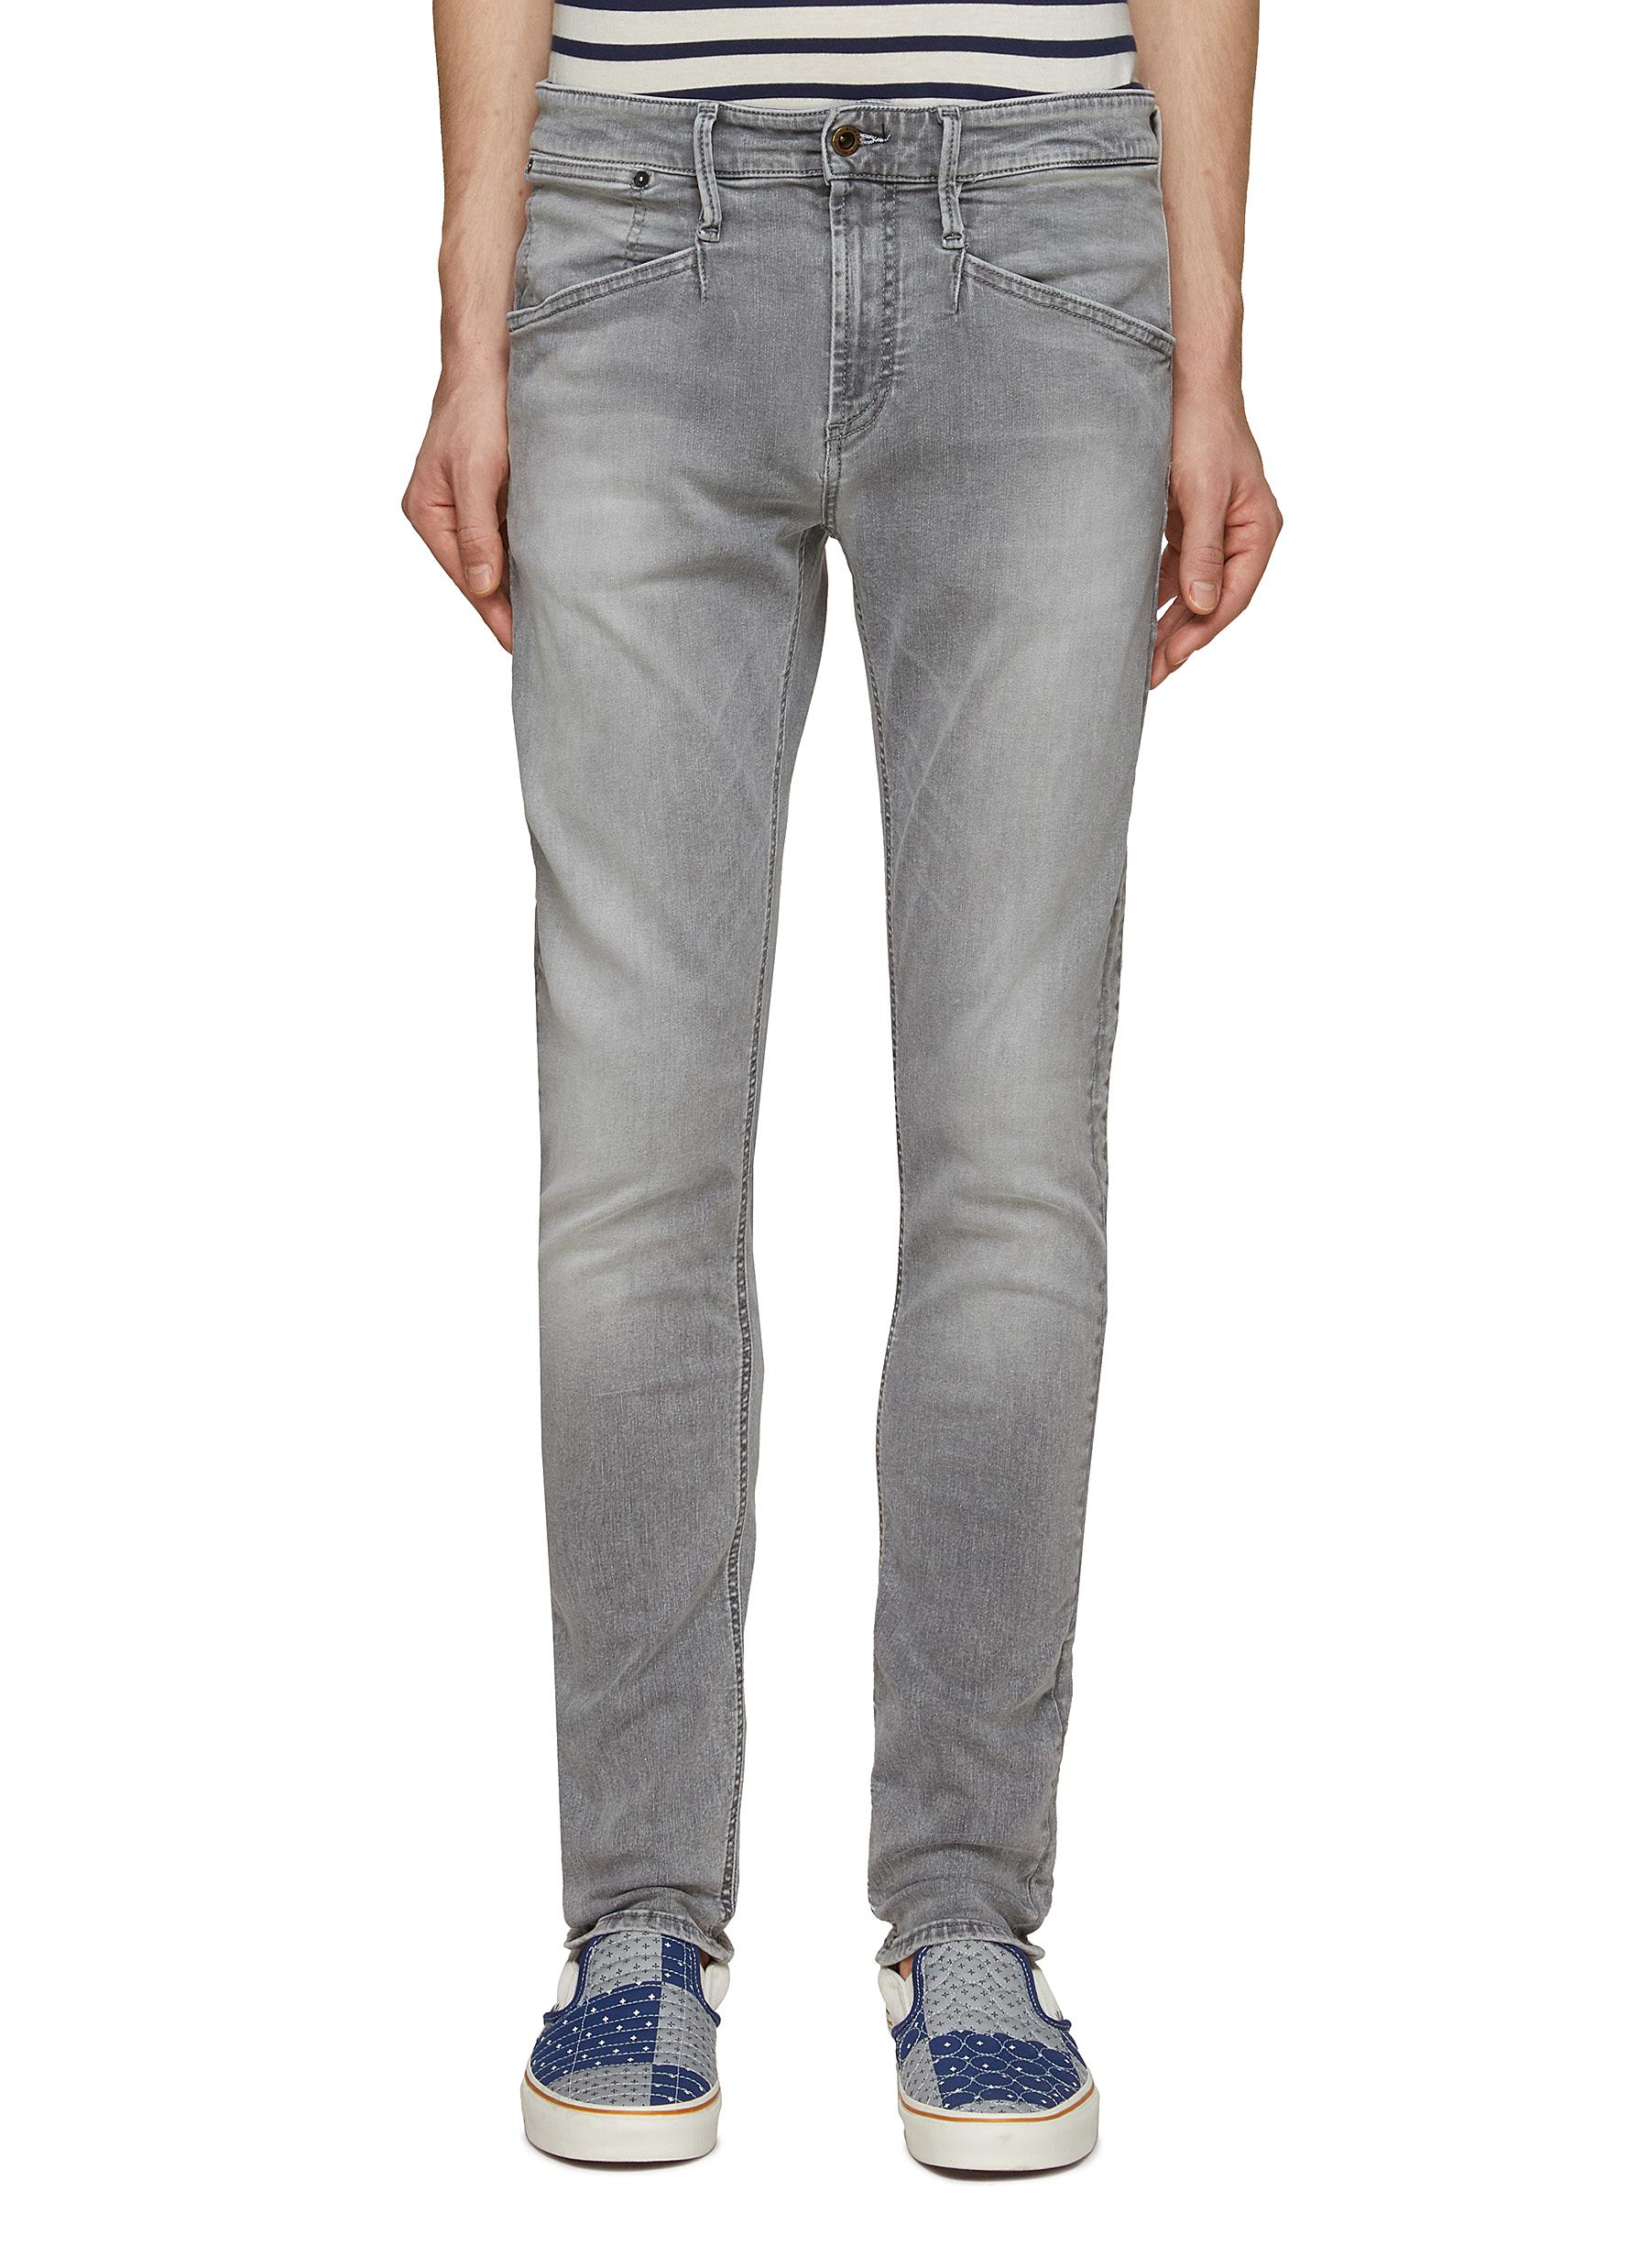 'BOLDER FREE MOVE' WASHED SKINNY JEANS